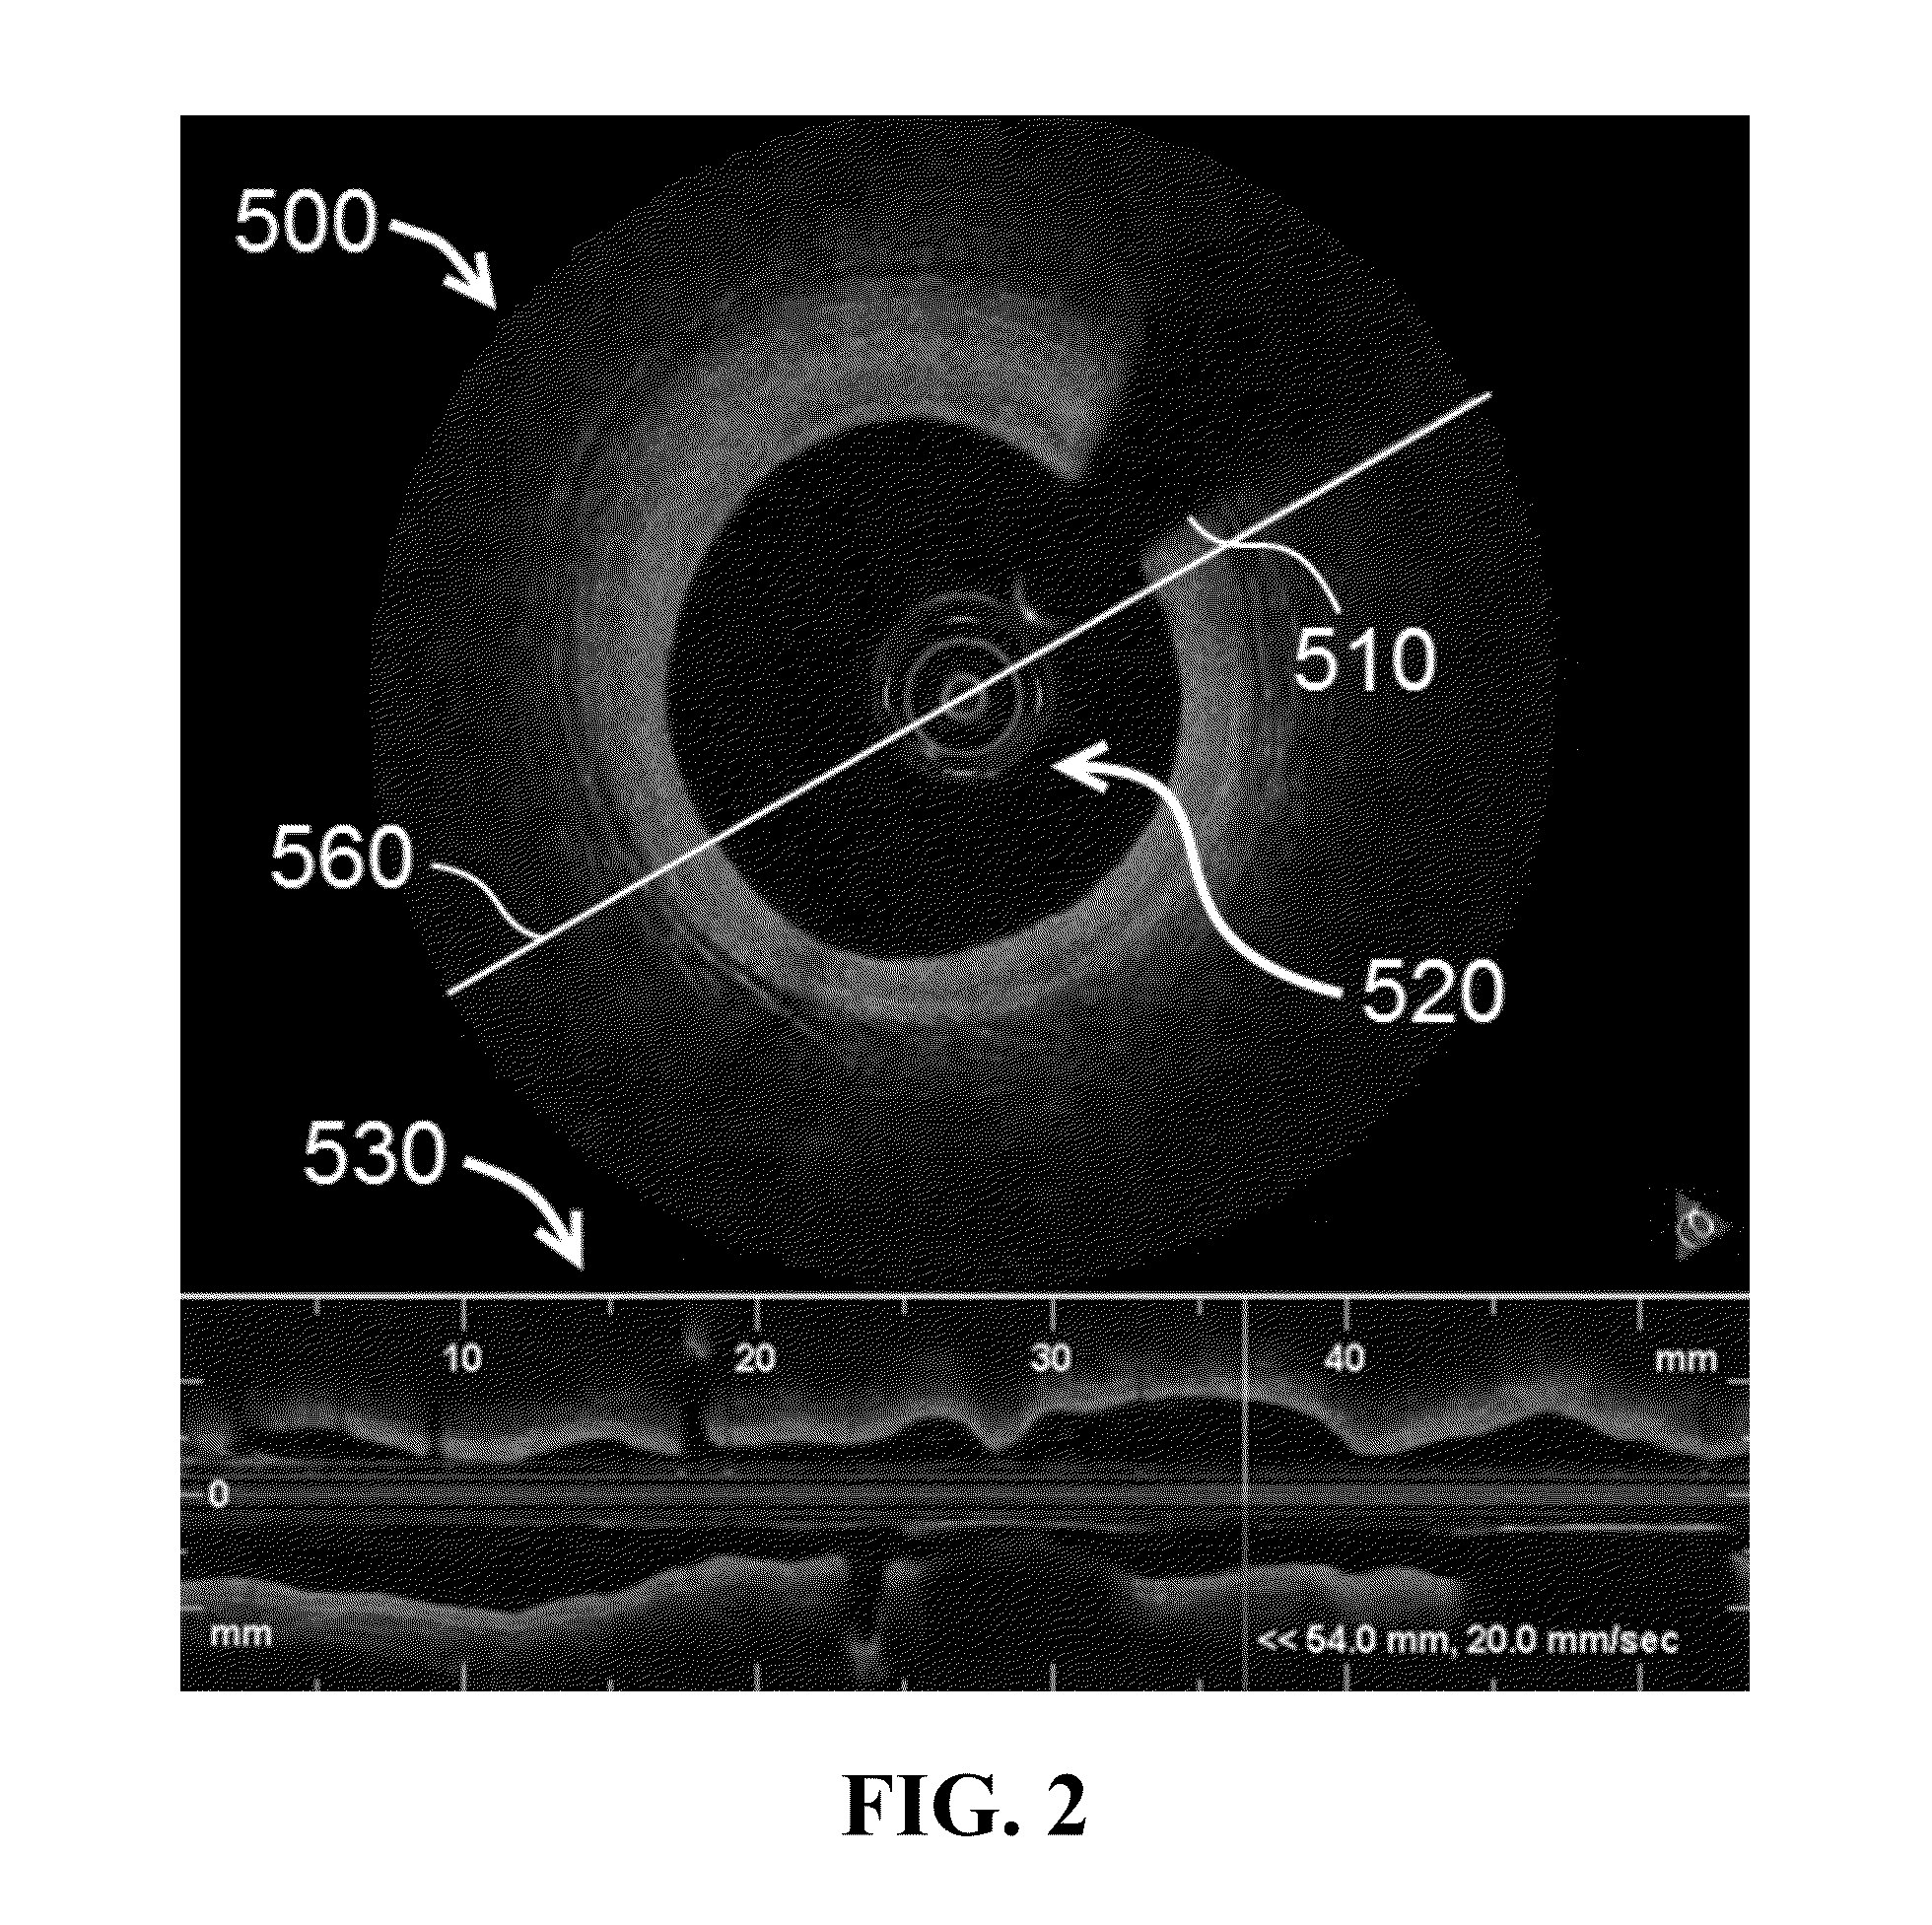 Apparatus and methods for identifying and evaluating bright spot indications observed through optical coherence tomography